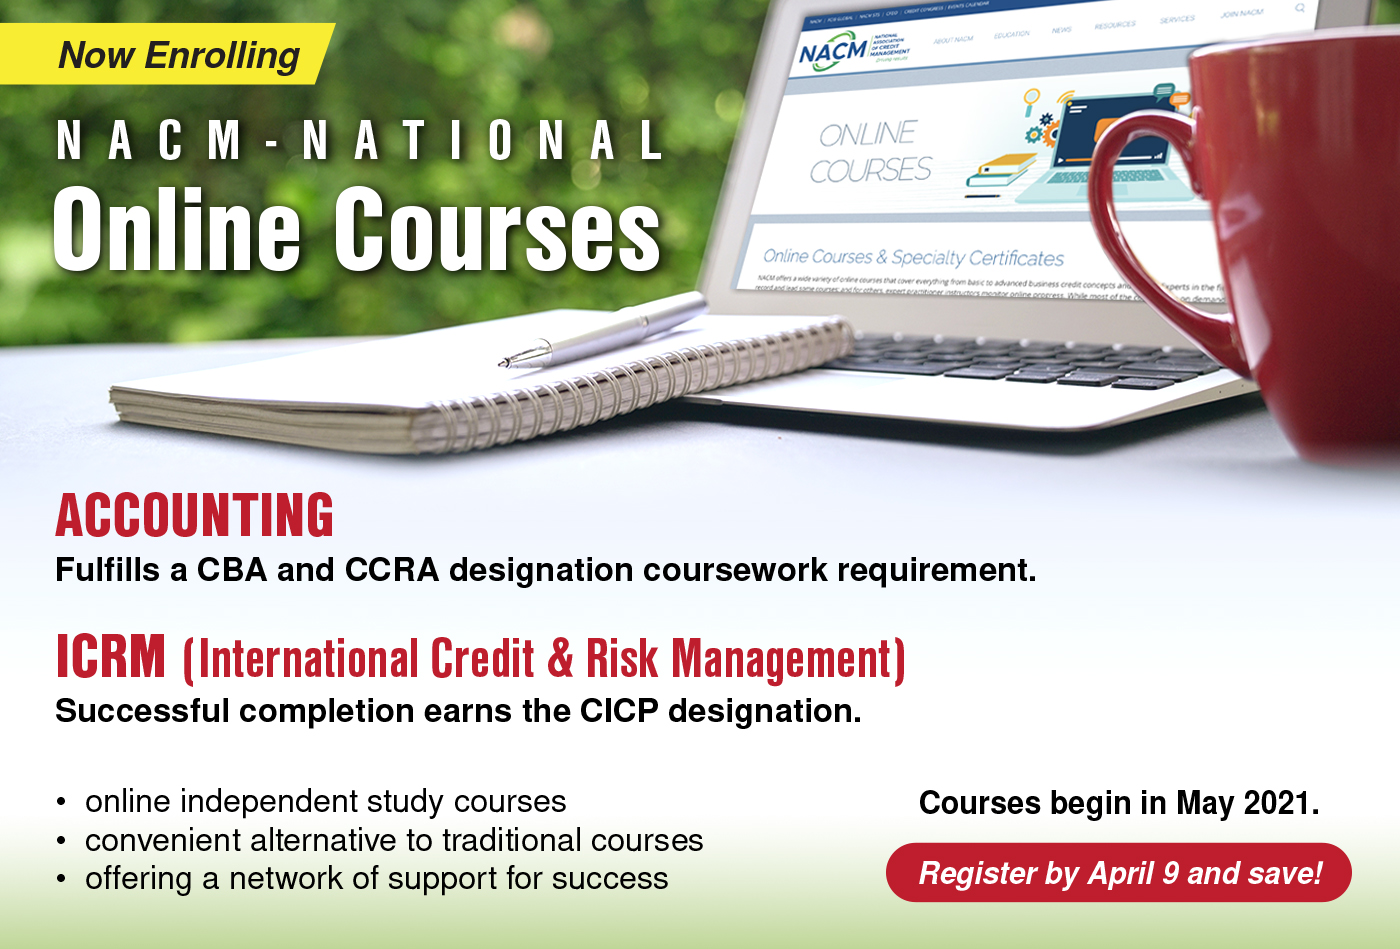 NACM National Online Courses - Accounting & International Credit & Risk Management | Register by April 9 and Save!